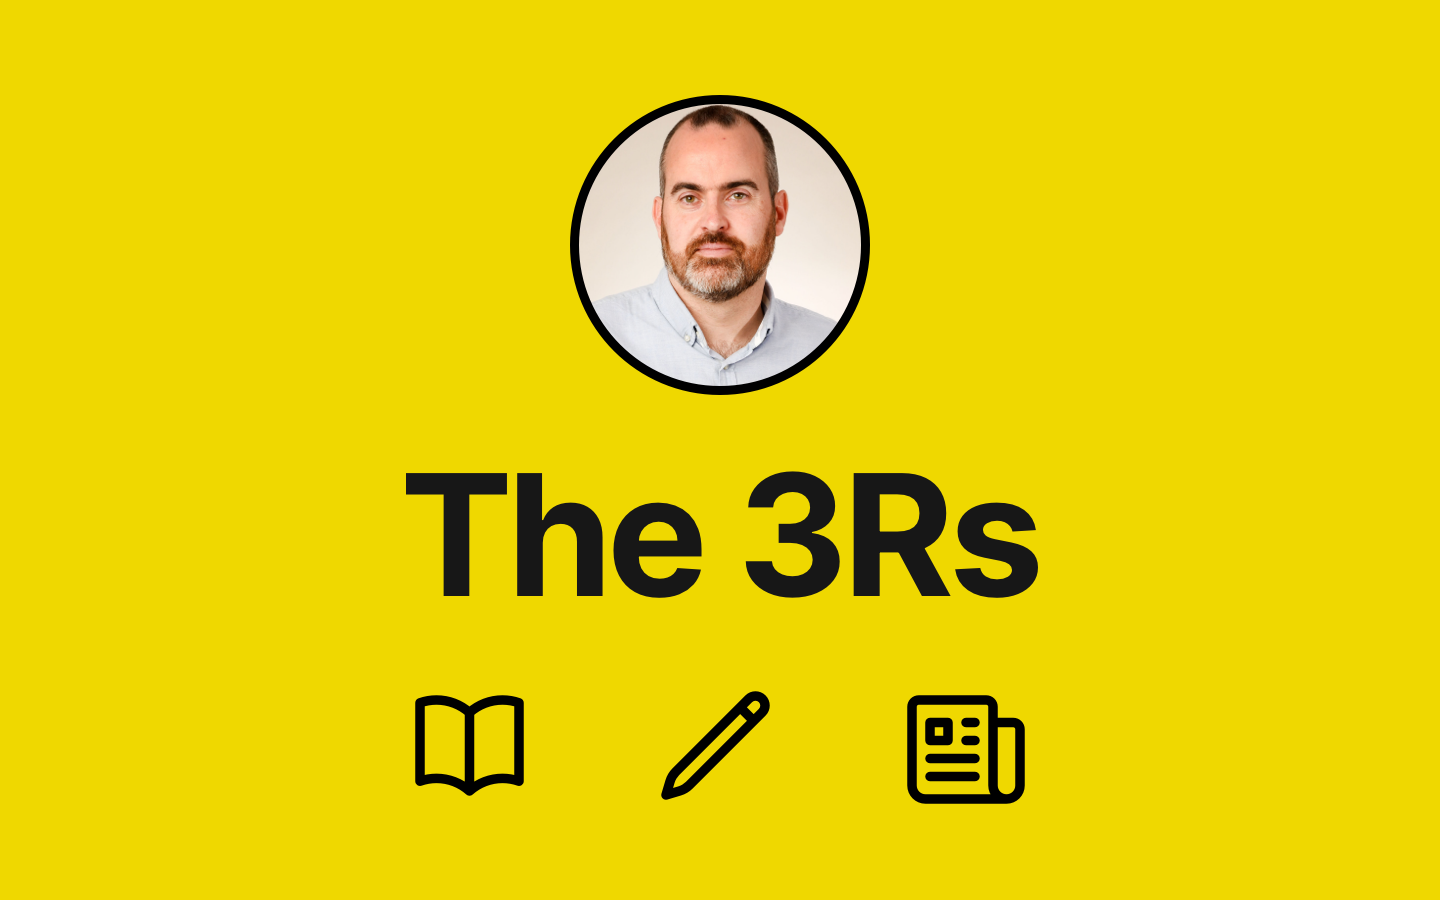 The 3Rs: What I'm reading, (w)riting, & the research I'm interested in - Issue #8 feature image